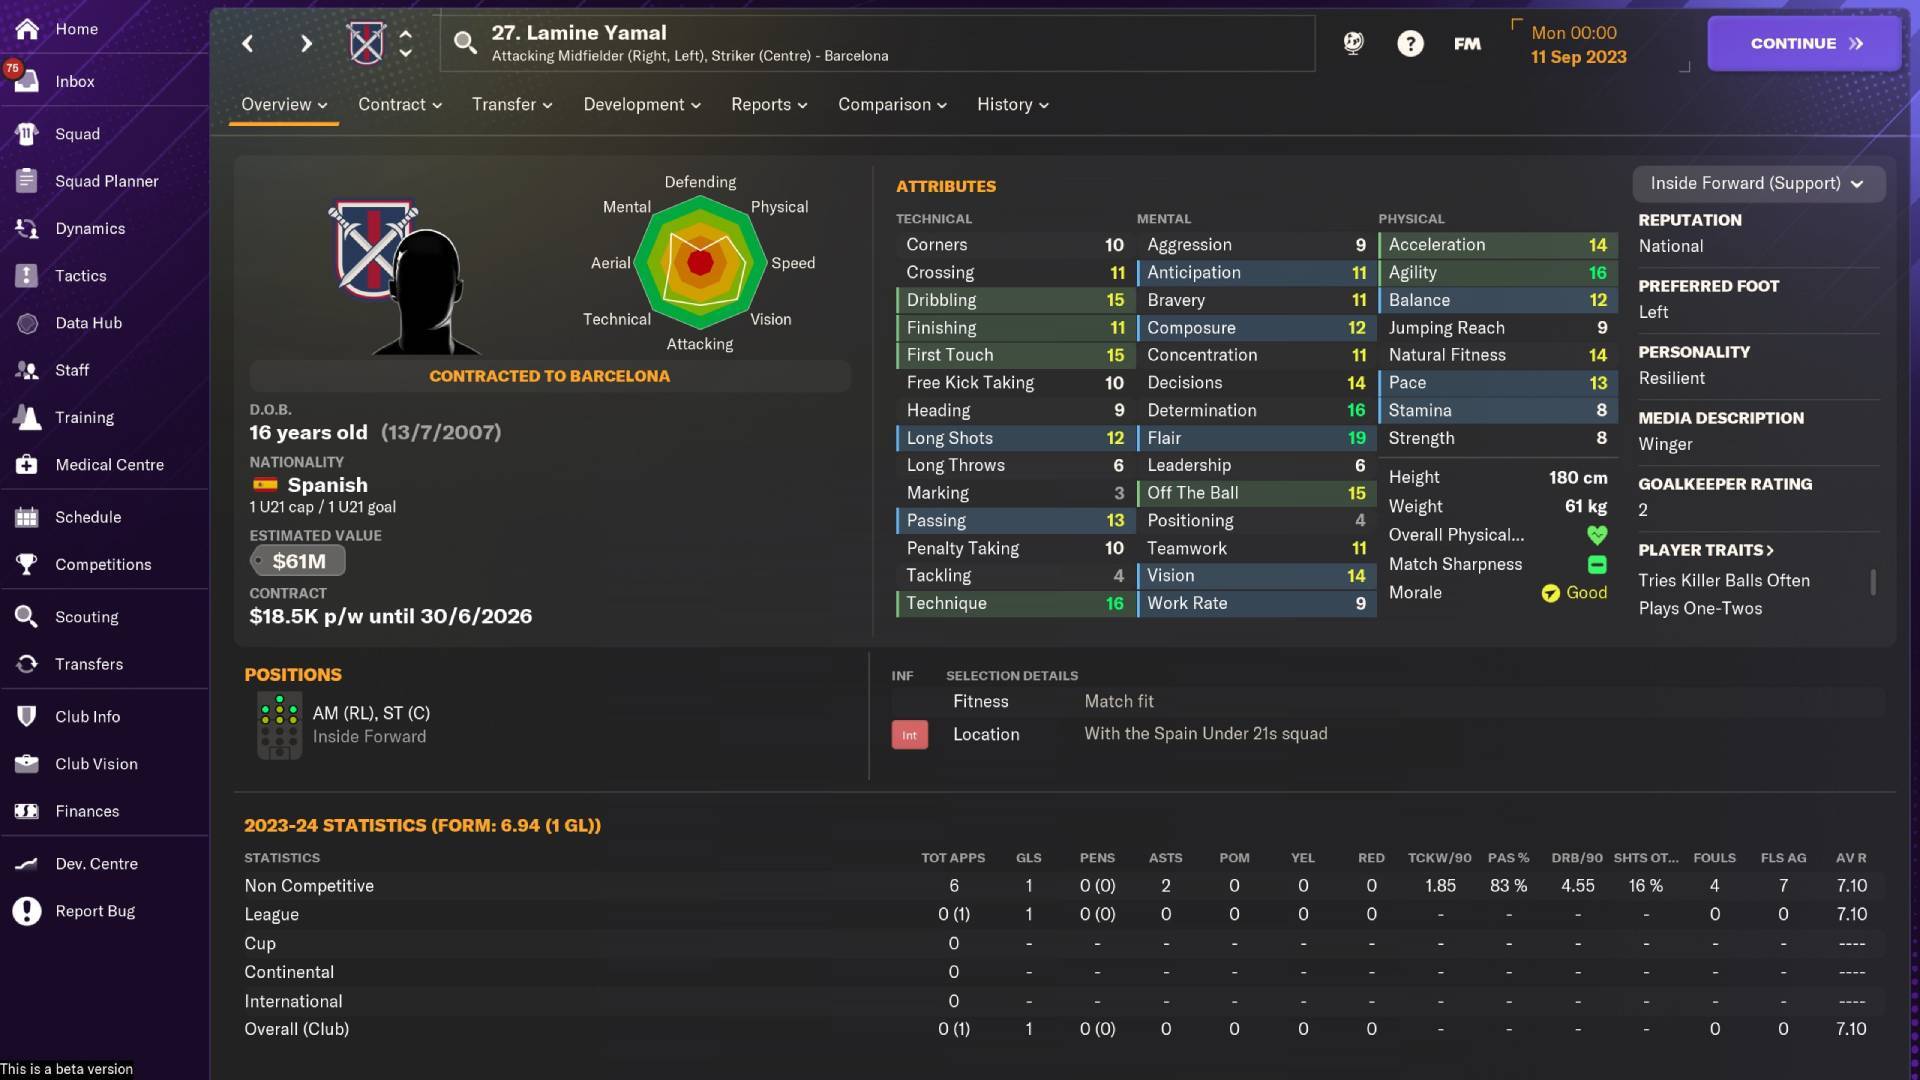 What Are The New Additions In Football Manager 2024?